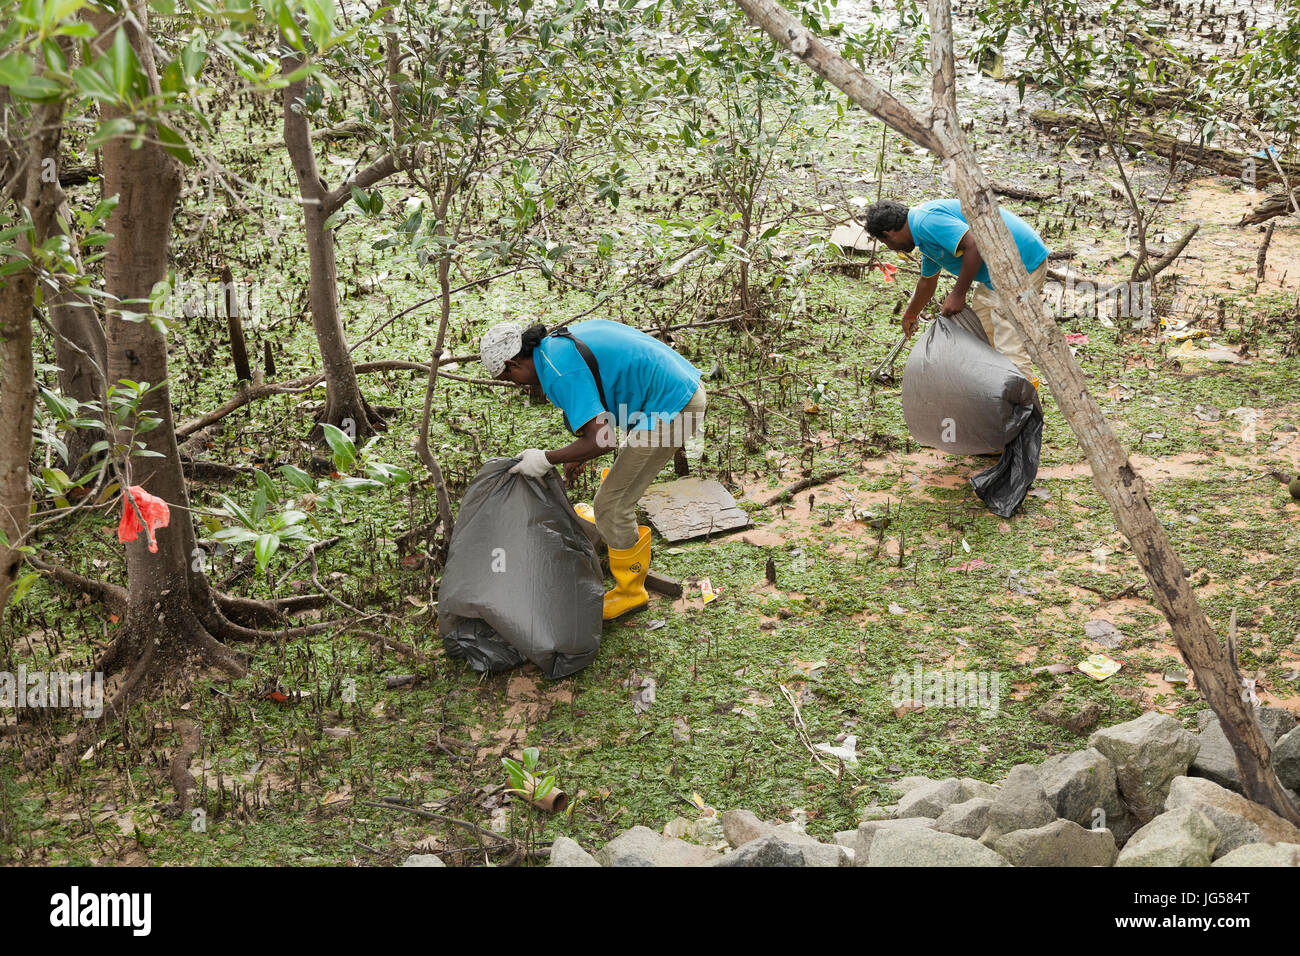 Clearing rubbish from the mangroves, low tide, Singapore Sungai Buloh coastal reserve Stock Photo